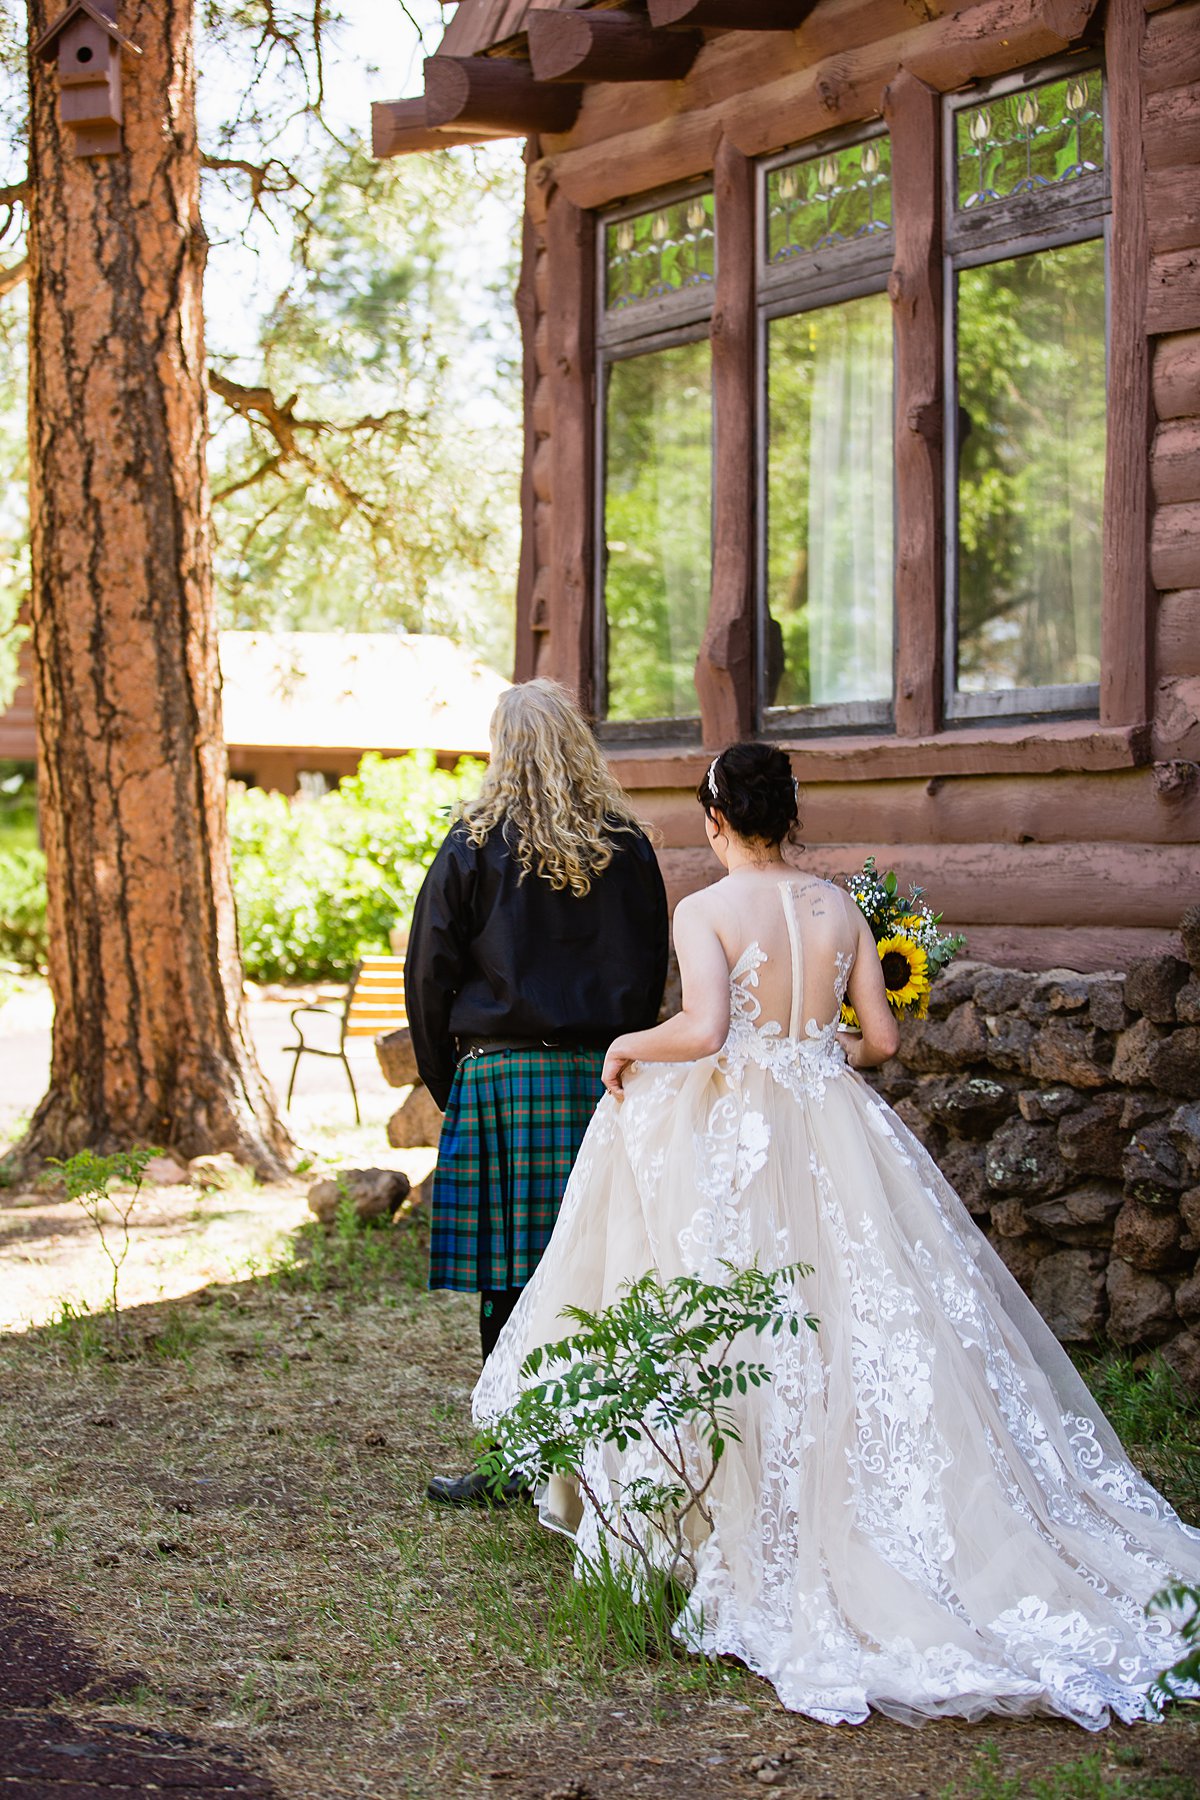 Bride and groom share an intimate moment during their first look at the Riordan Mansion at by Flagstaff wedding photographers PMA Photography.